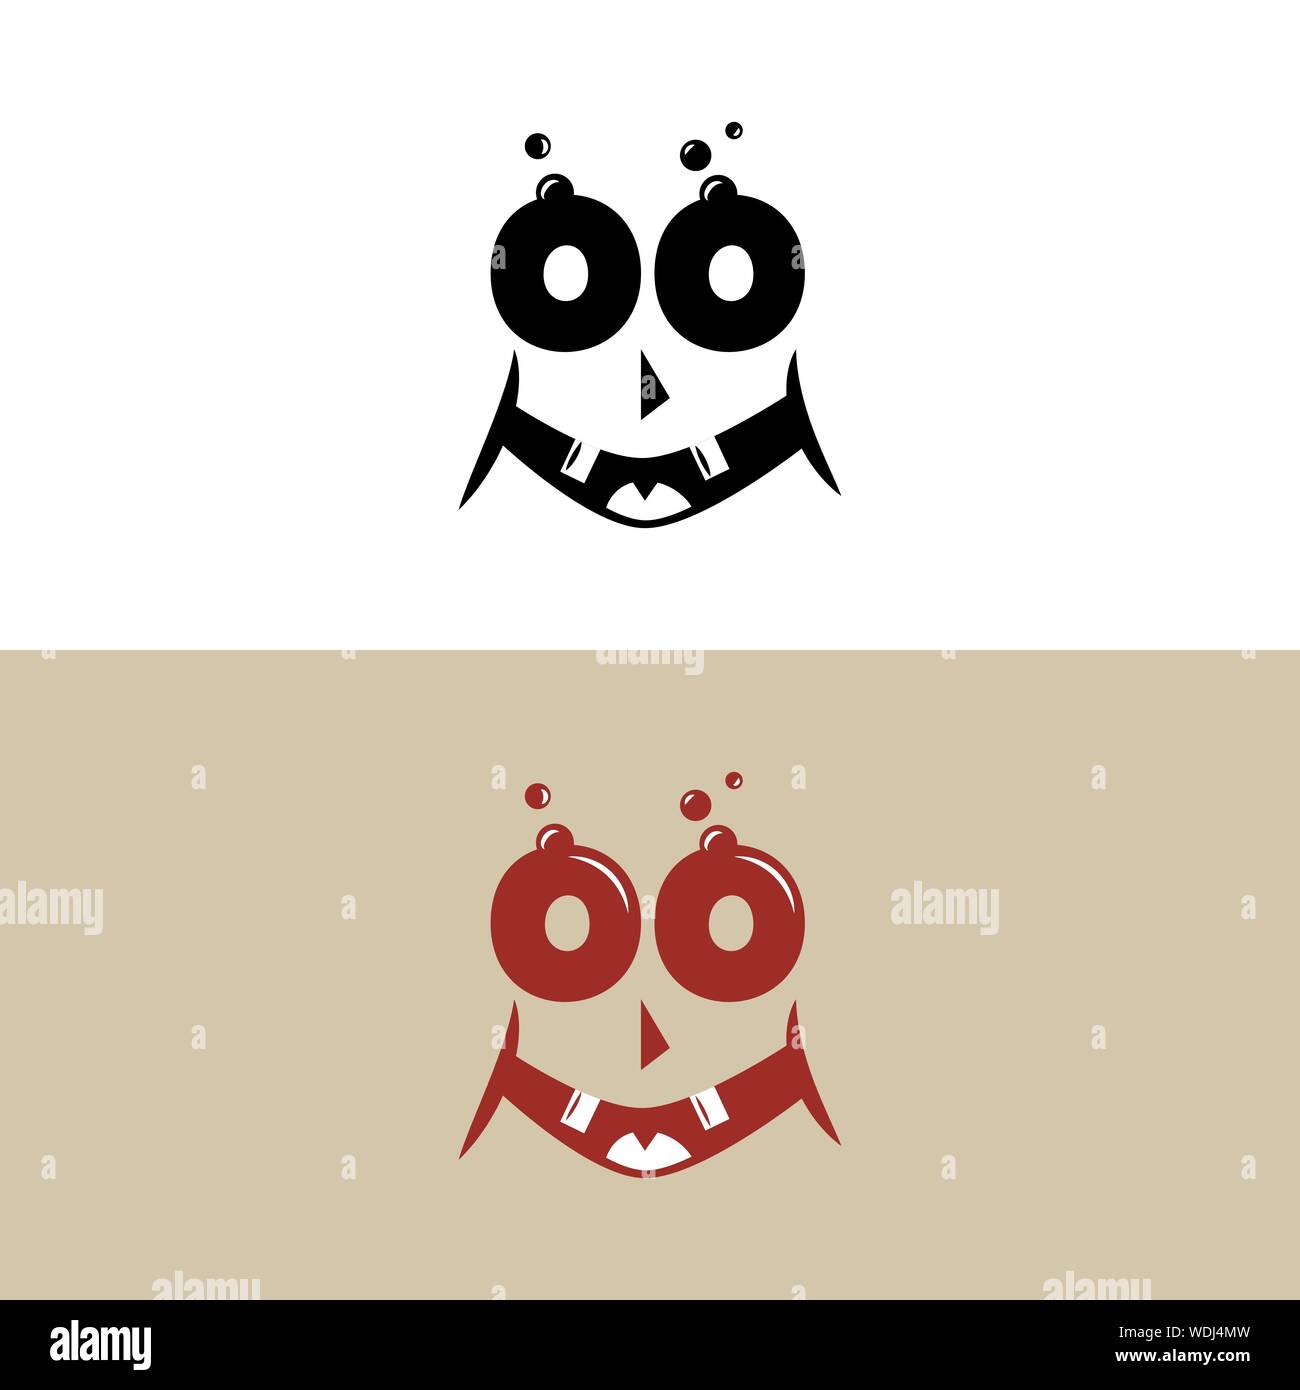 Monster happy face in retro style, smile vector illustration on white background. Stock Vector